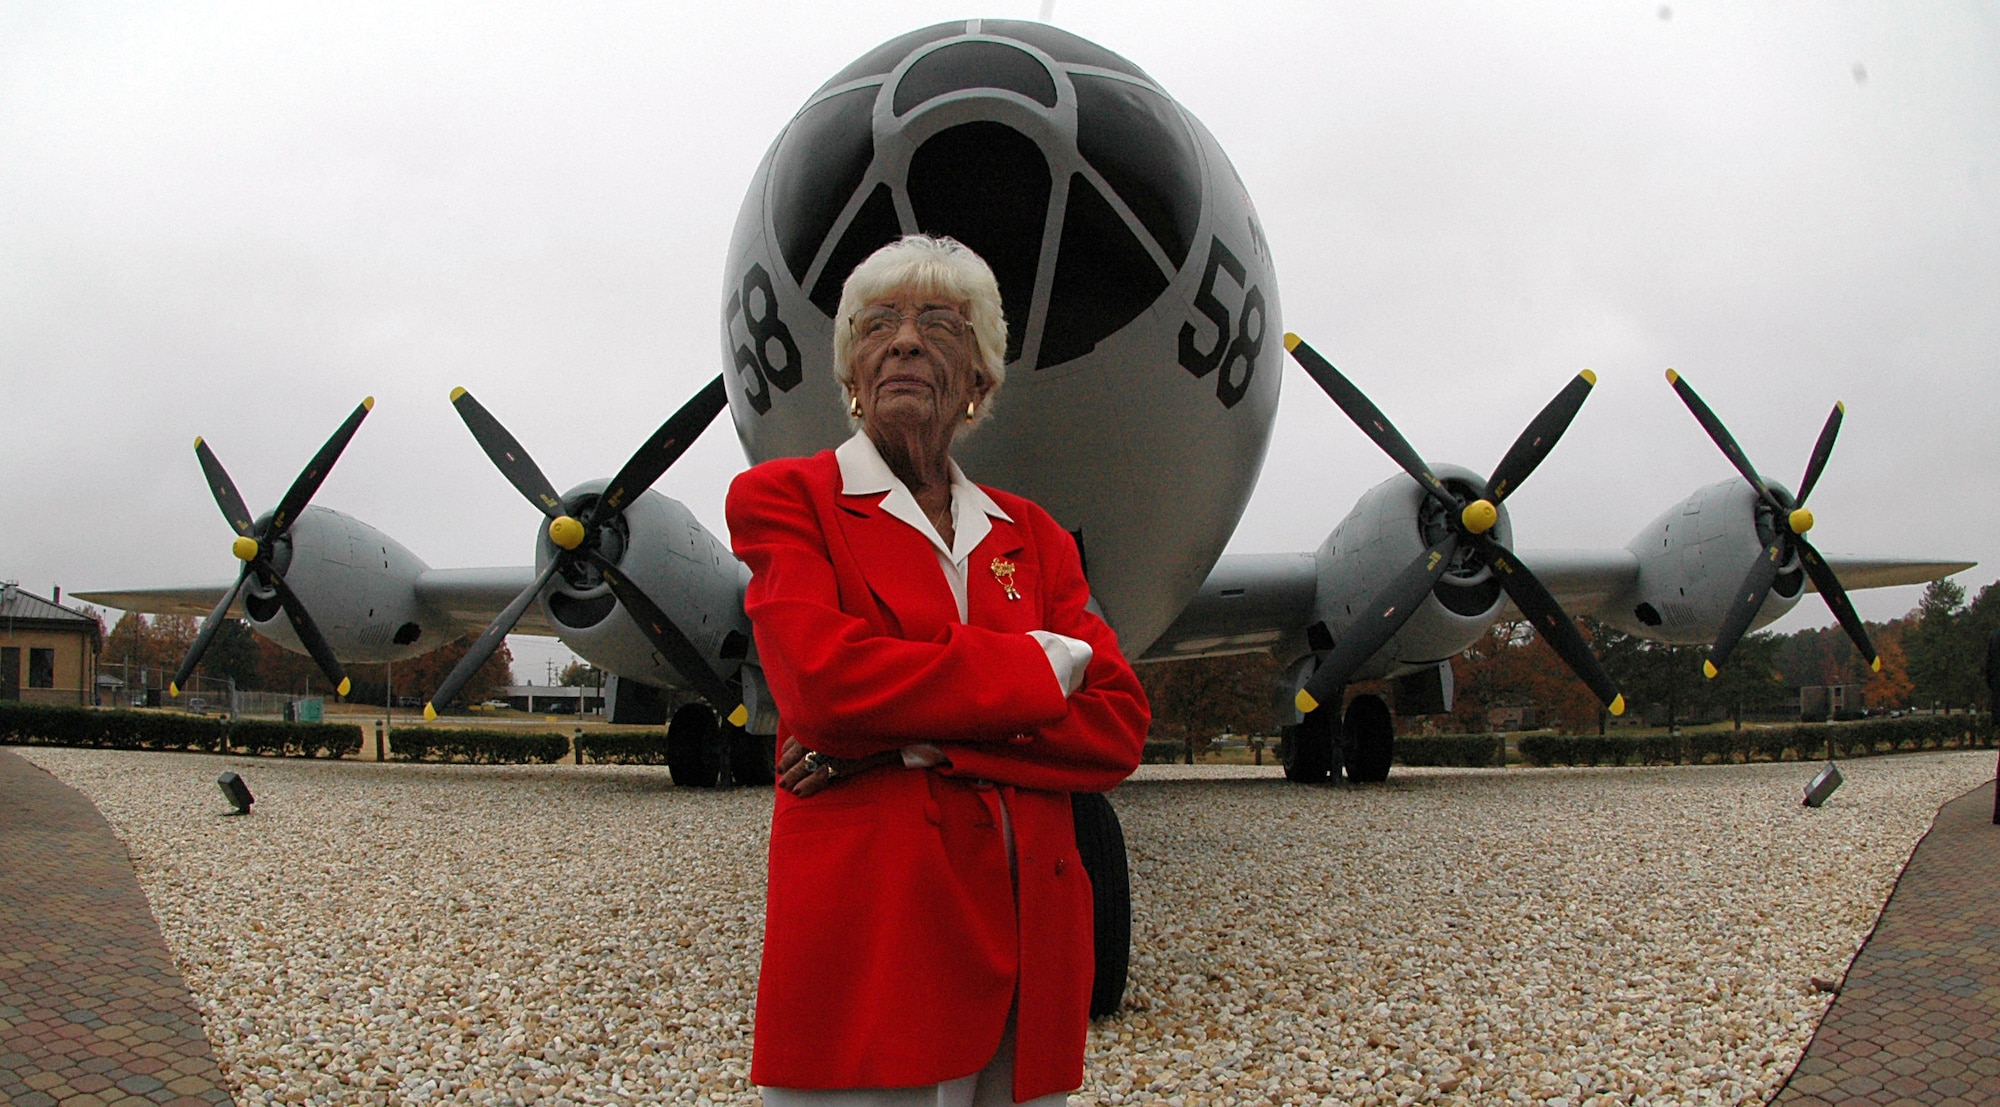 Ruth Young, a former ?Rosie the Riveter? during World War II, visits the B-29 Superfortress at Dobbins Air Reserve Base in Marietta, Ga.  Ms. Young worked on B-29?s at the former Bell Plant in Marietta, from March of 1945 until the end of the war.  ?Rosie the Riveter? is a slang term given to the women who worked to produce American planes, tanks, munitions and weapons during the war.  